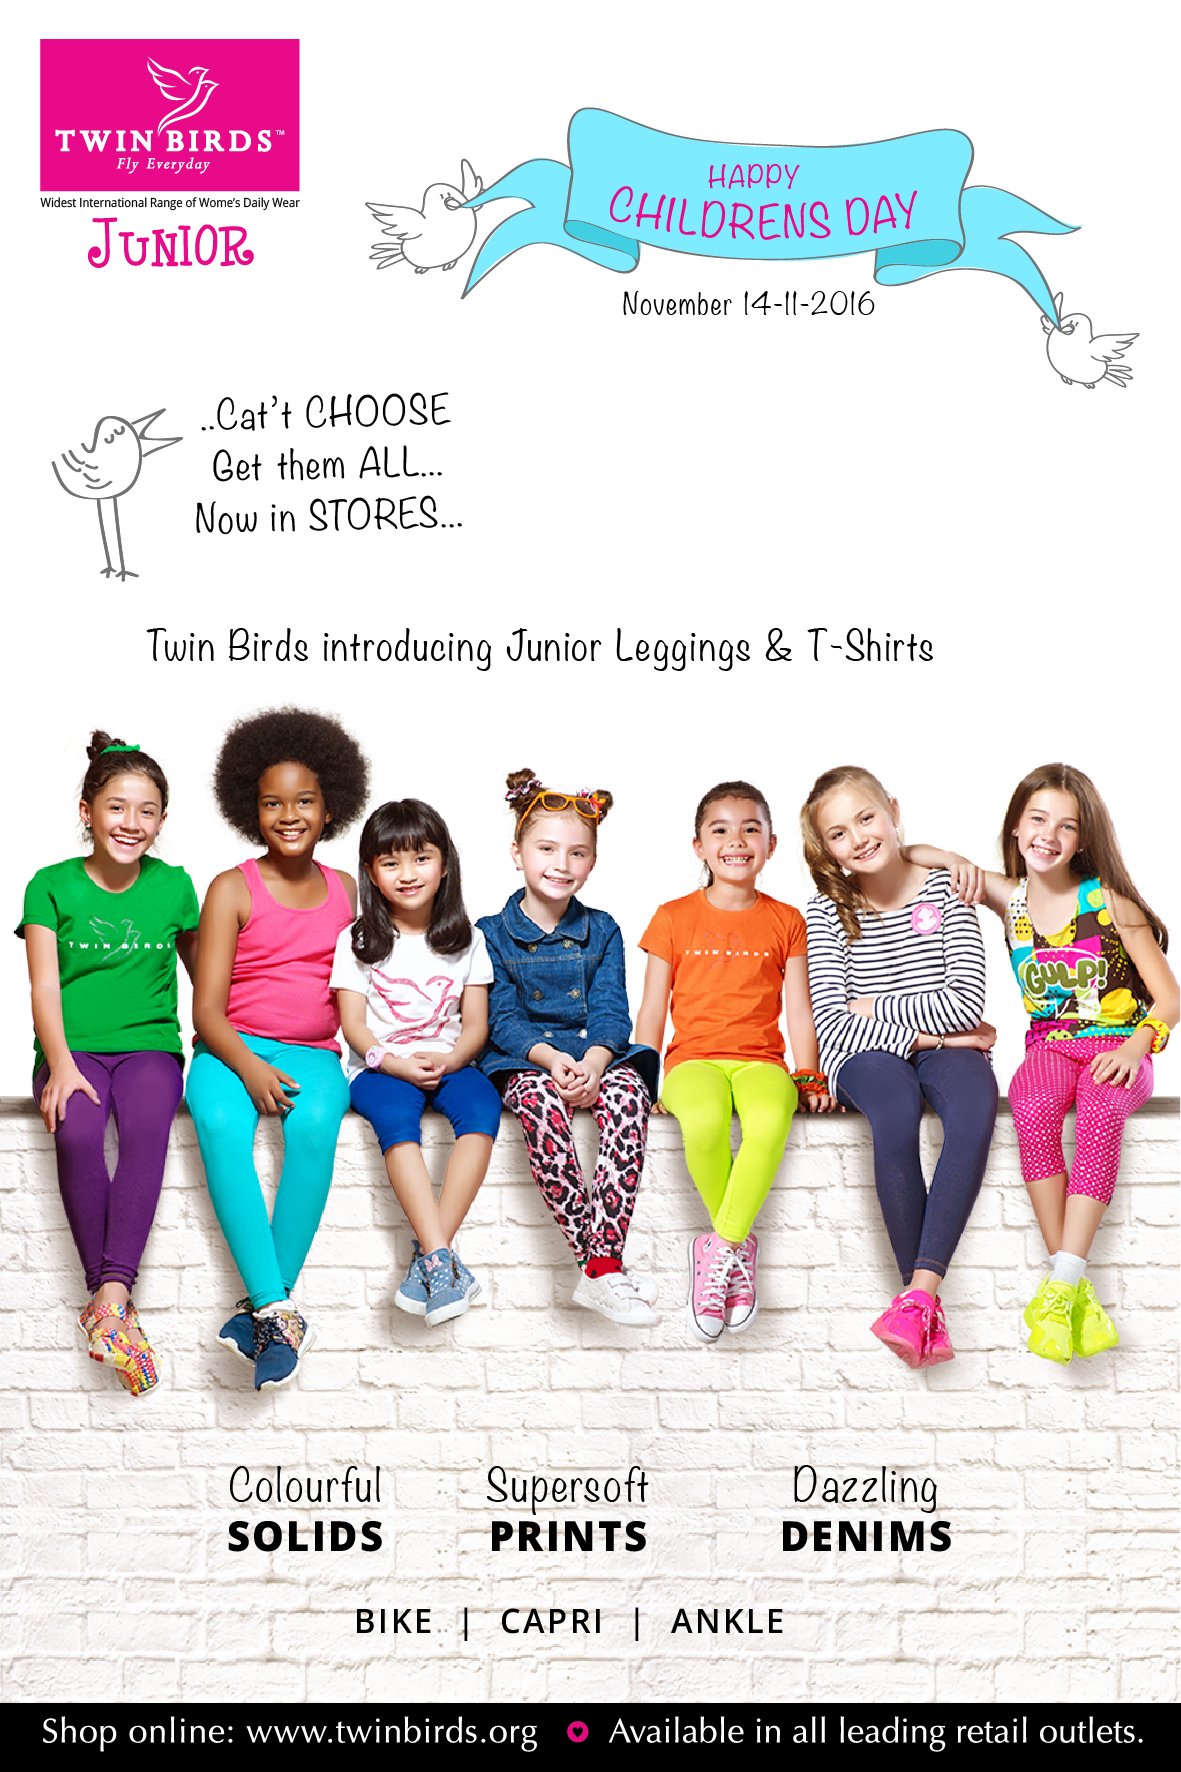 Twin Birds Online on X: Celebrate this Childrens Day with Twin Birds  Junior Leggings & T-Shirts!!! #HappyChildrensDay #TwinBirdsCelebration  #TwinBirdsJunior  / X